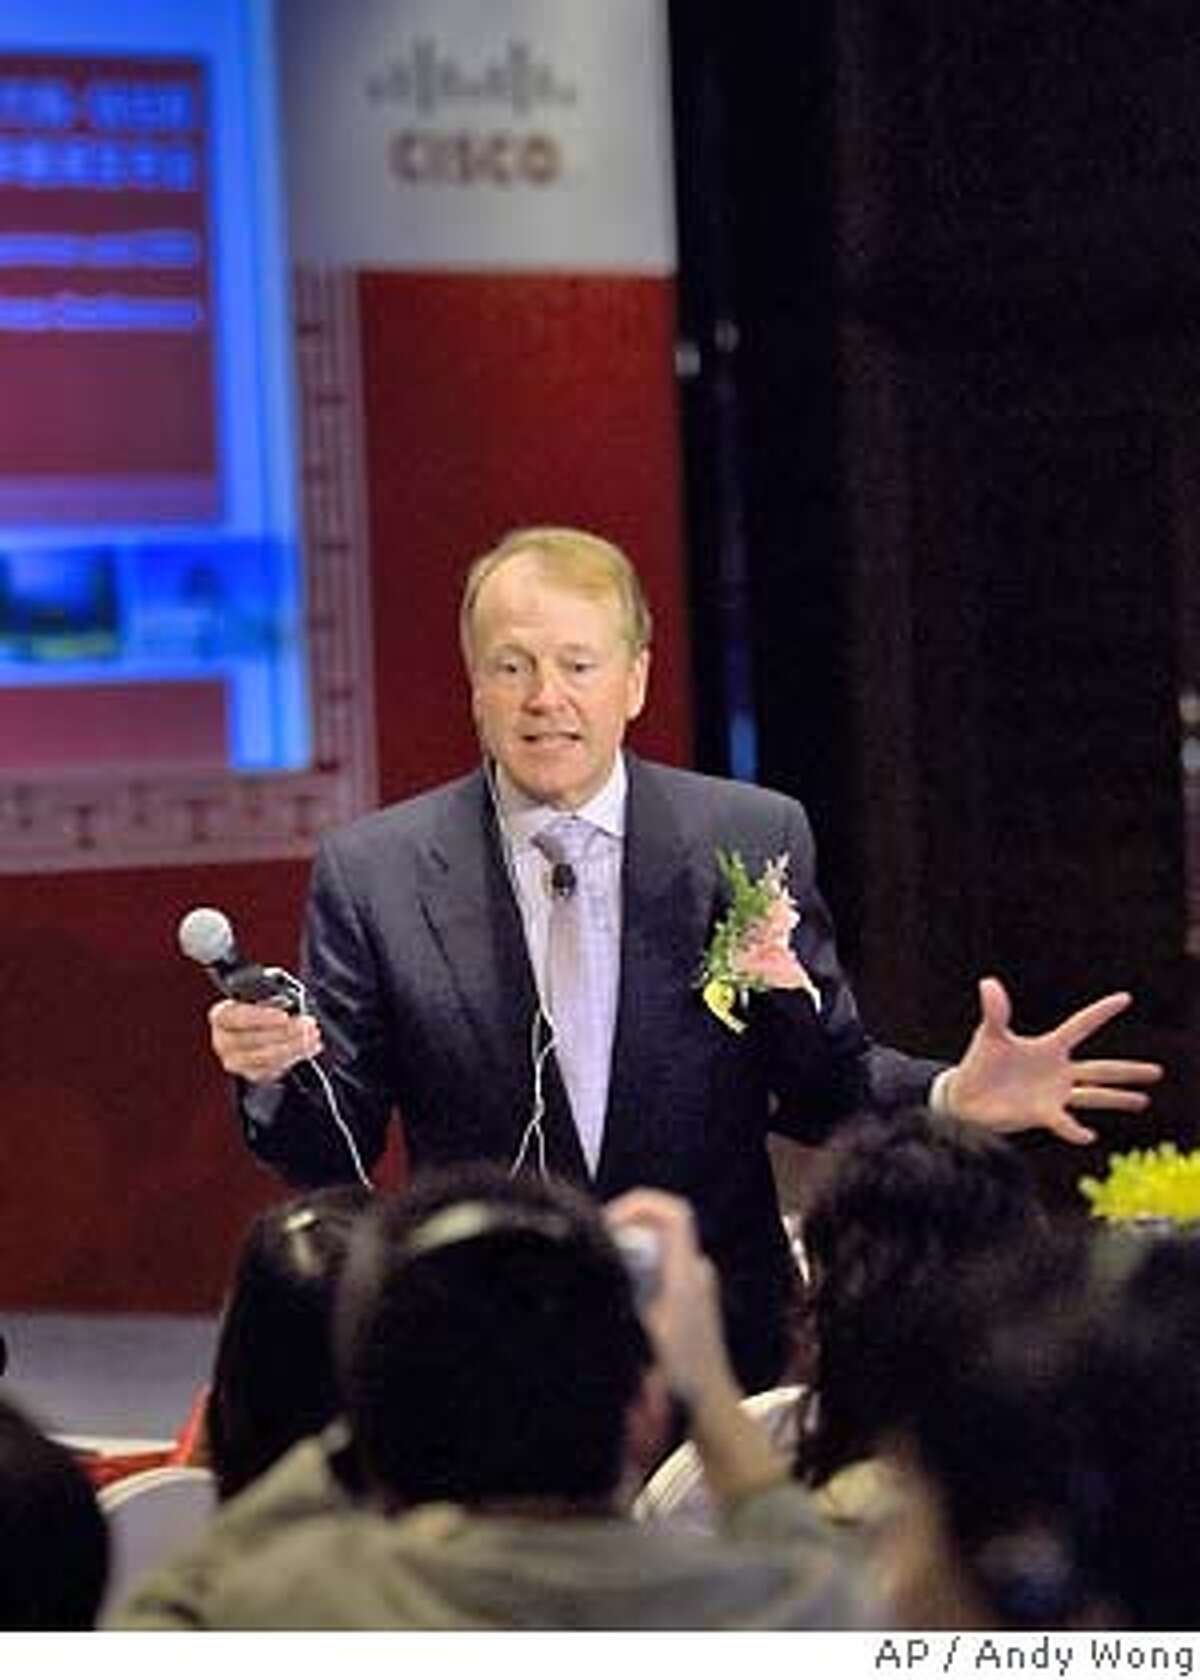 Cisco Chief Executive John Chambers speaks to the journalists during a news conference at a hotel in Beijing, China, Thursday, Nov. 1, 2007. Network gear maker Cisco Systems Inc. on Thursday announced a multi-year, US$16 billion (euro11.1 billion) series of initiatives to expand in China with investments in manufacturing, venture capital and education efforts. (AP Photo/Andy Wong) Ran on: 11-02-2007 Cisco CEO John Chambers toasts to the growing relationship with Jack Ma, chairman and CEO of Alibaba.